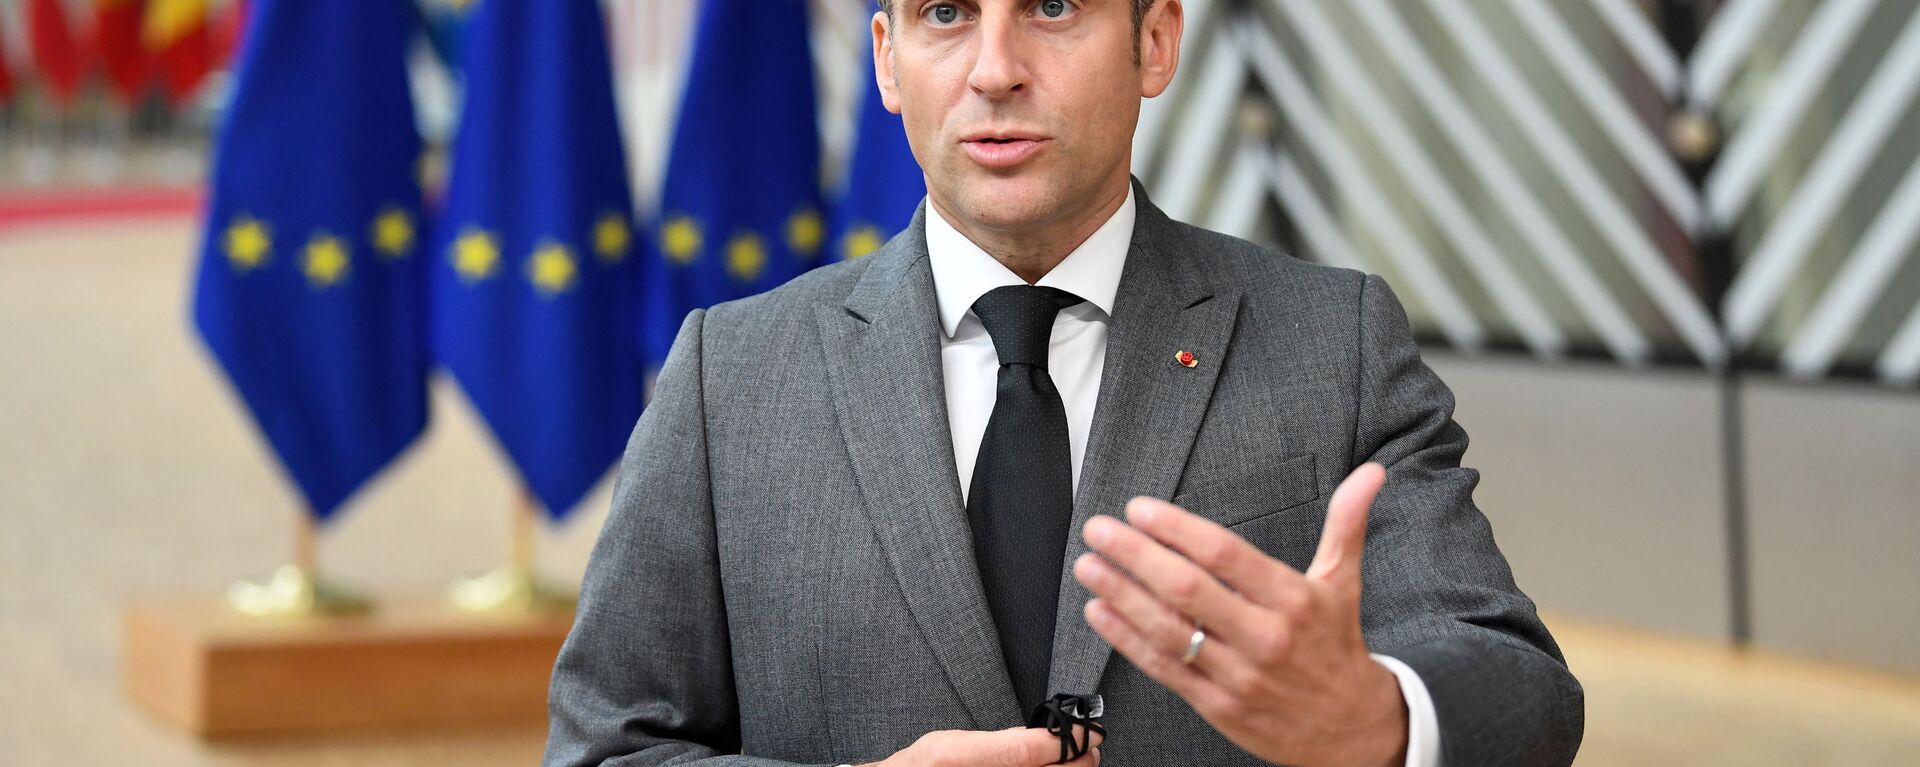 France's President Emmanuel Macron addresses the media as he arrives on the first day of the European Union summit at The European Council Building in Brussels, Belgium June 24, 2021. - Sputnik International, 1920, 24.06.2021